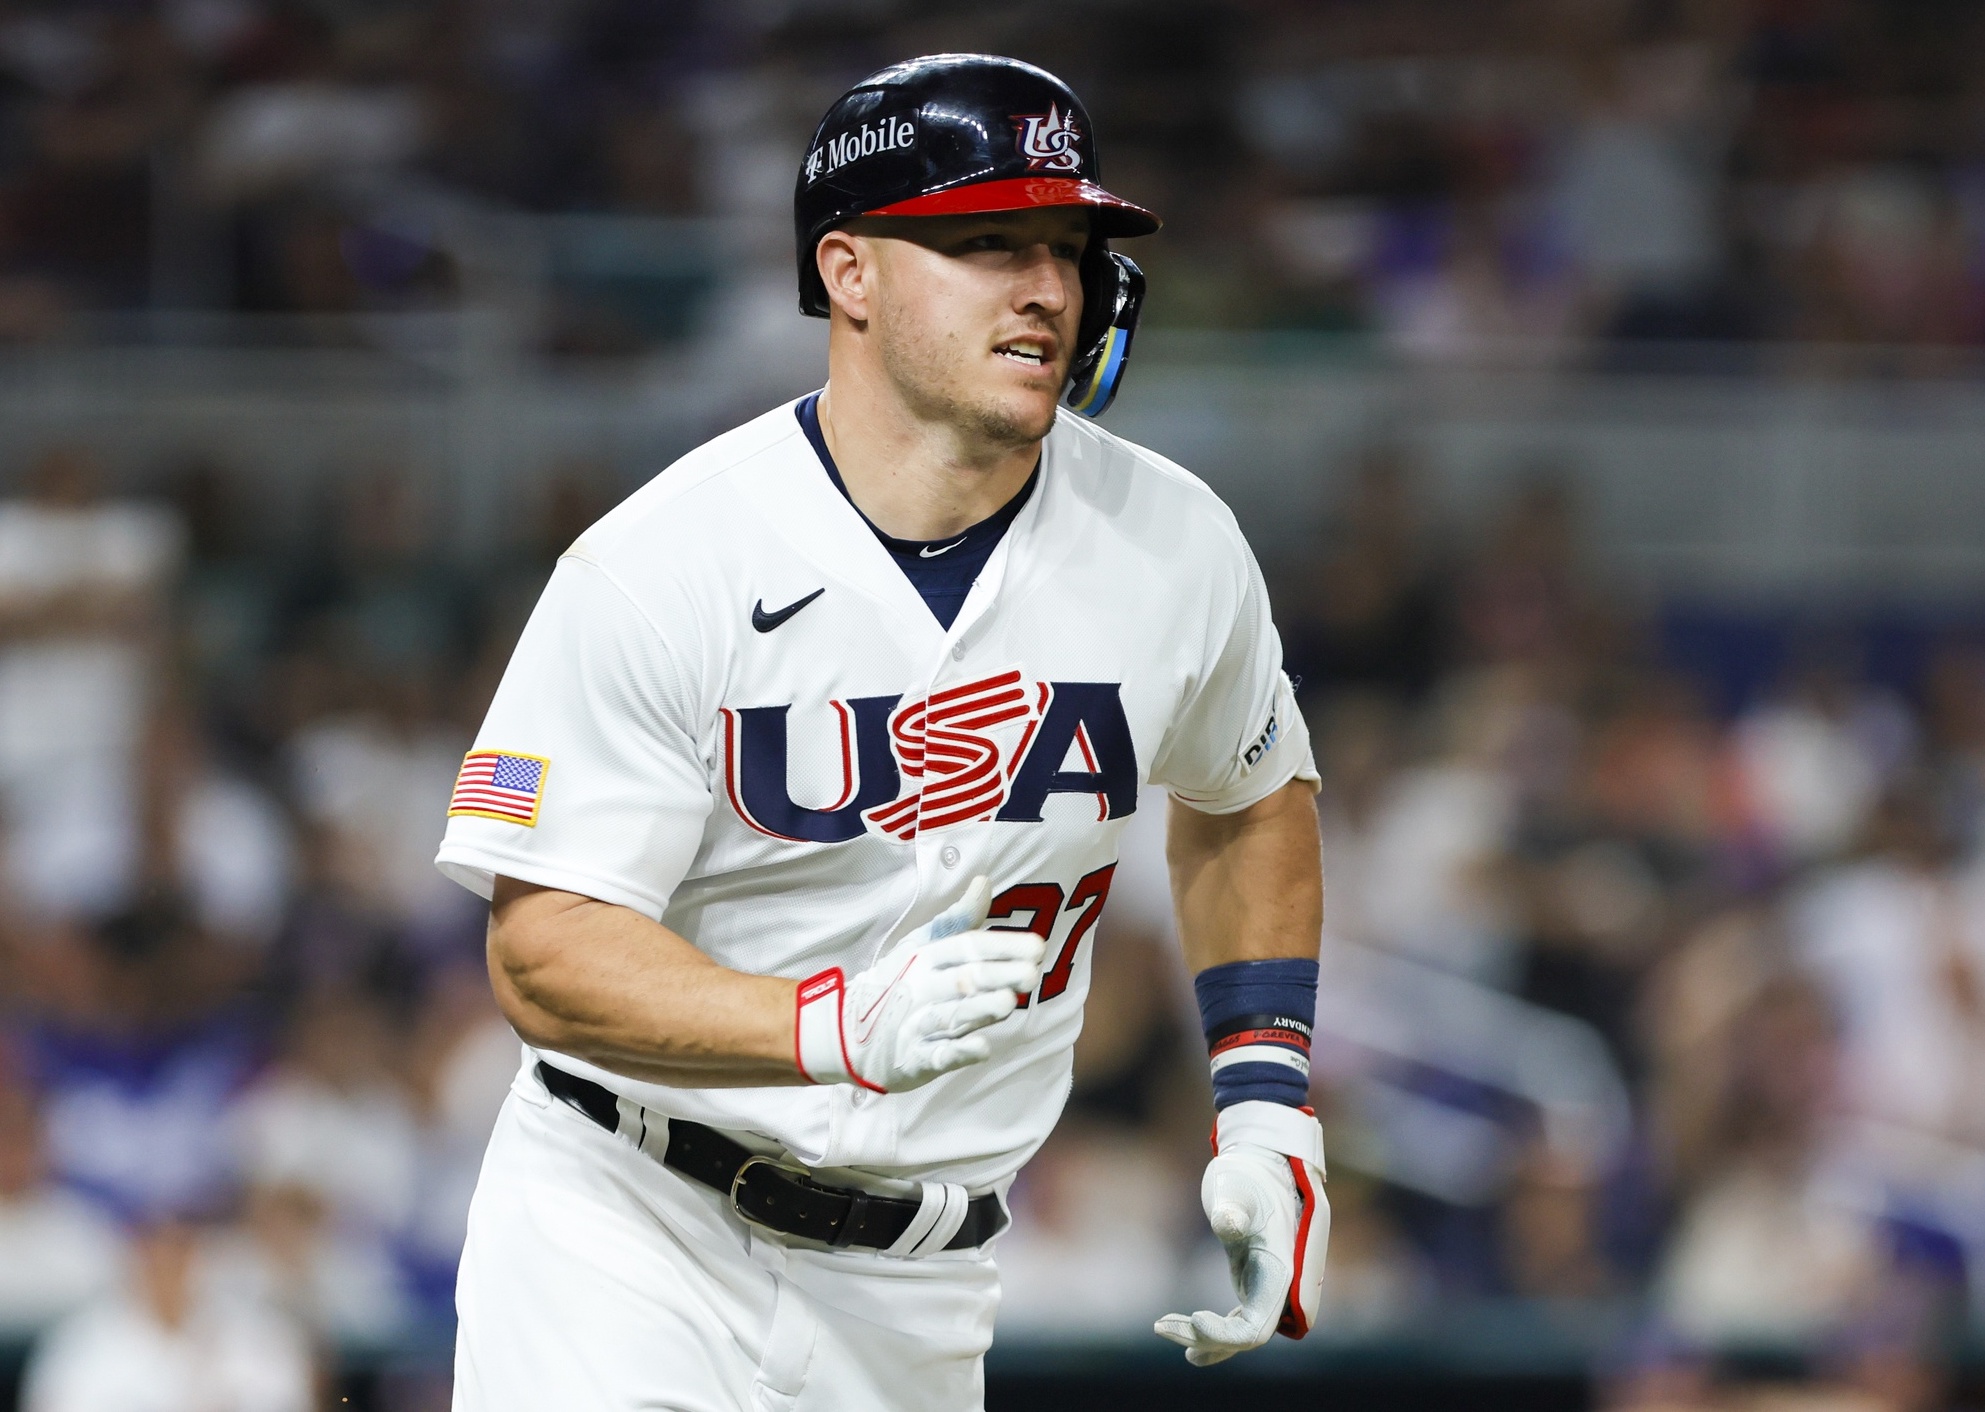 Mike Trout & Team USA Heading To World Baseball Classic Championship Game